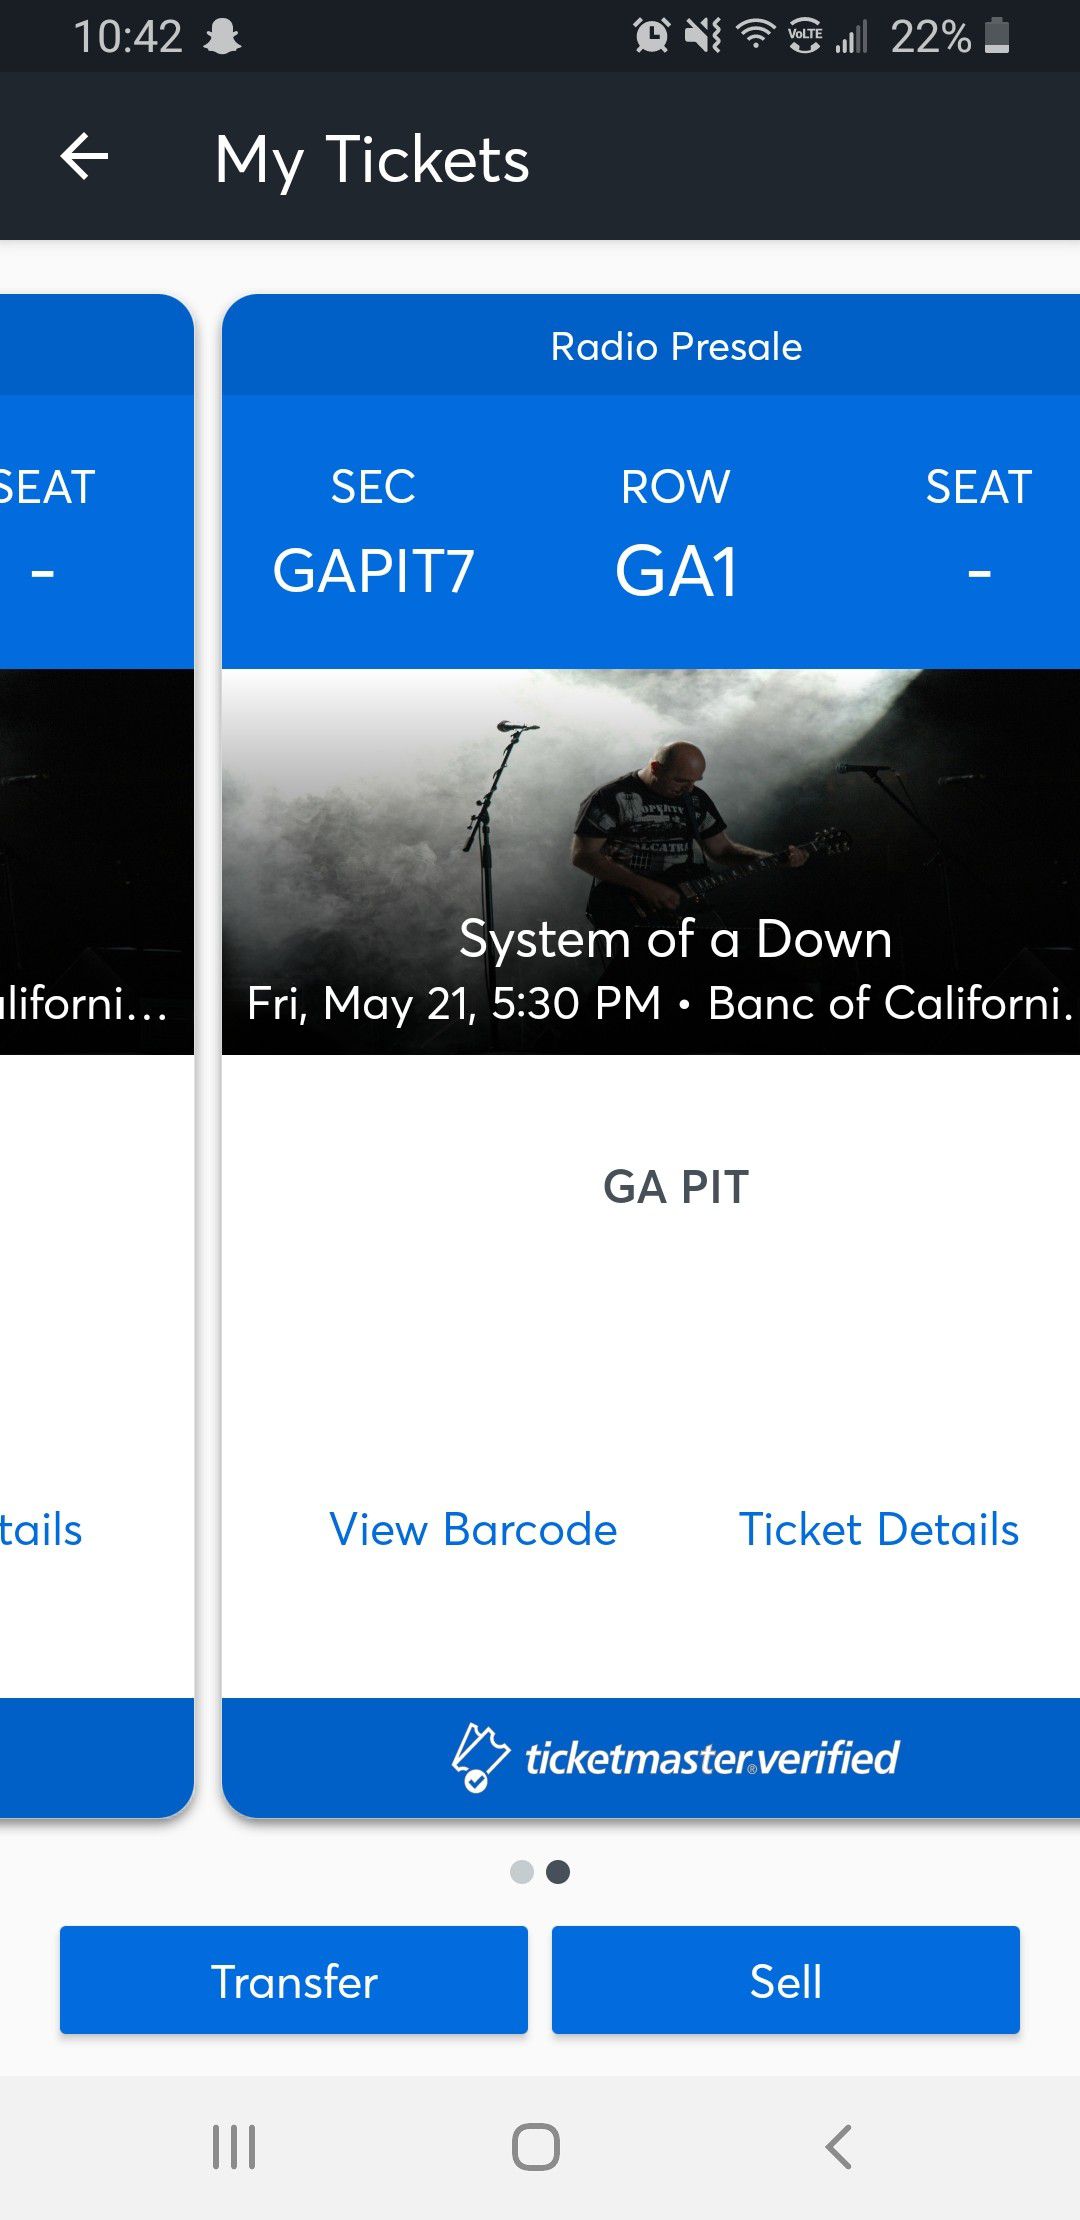 System of a Down and Korn pit tickets